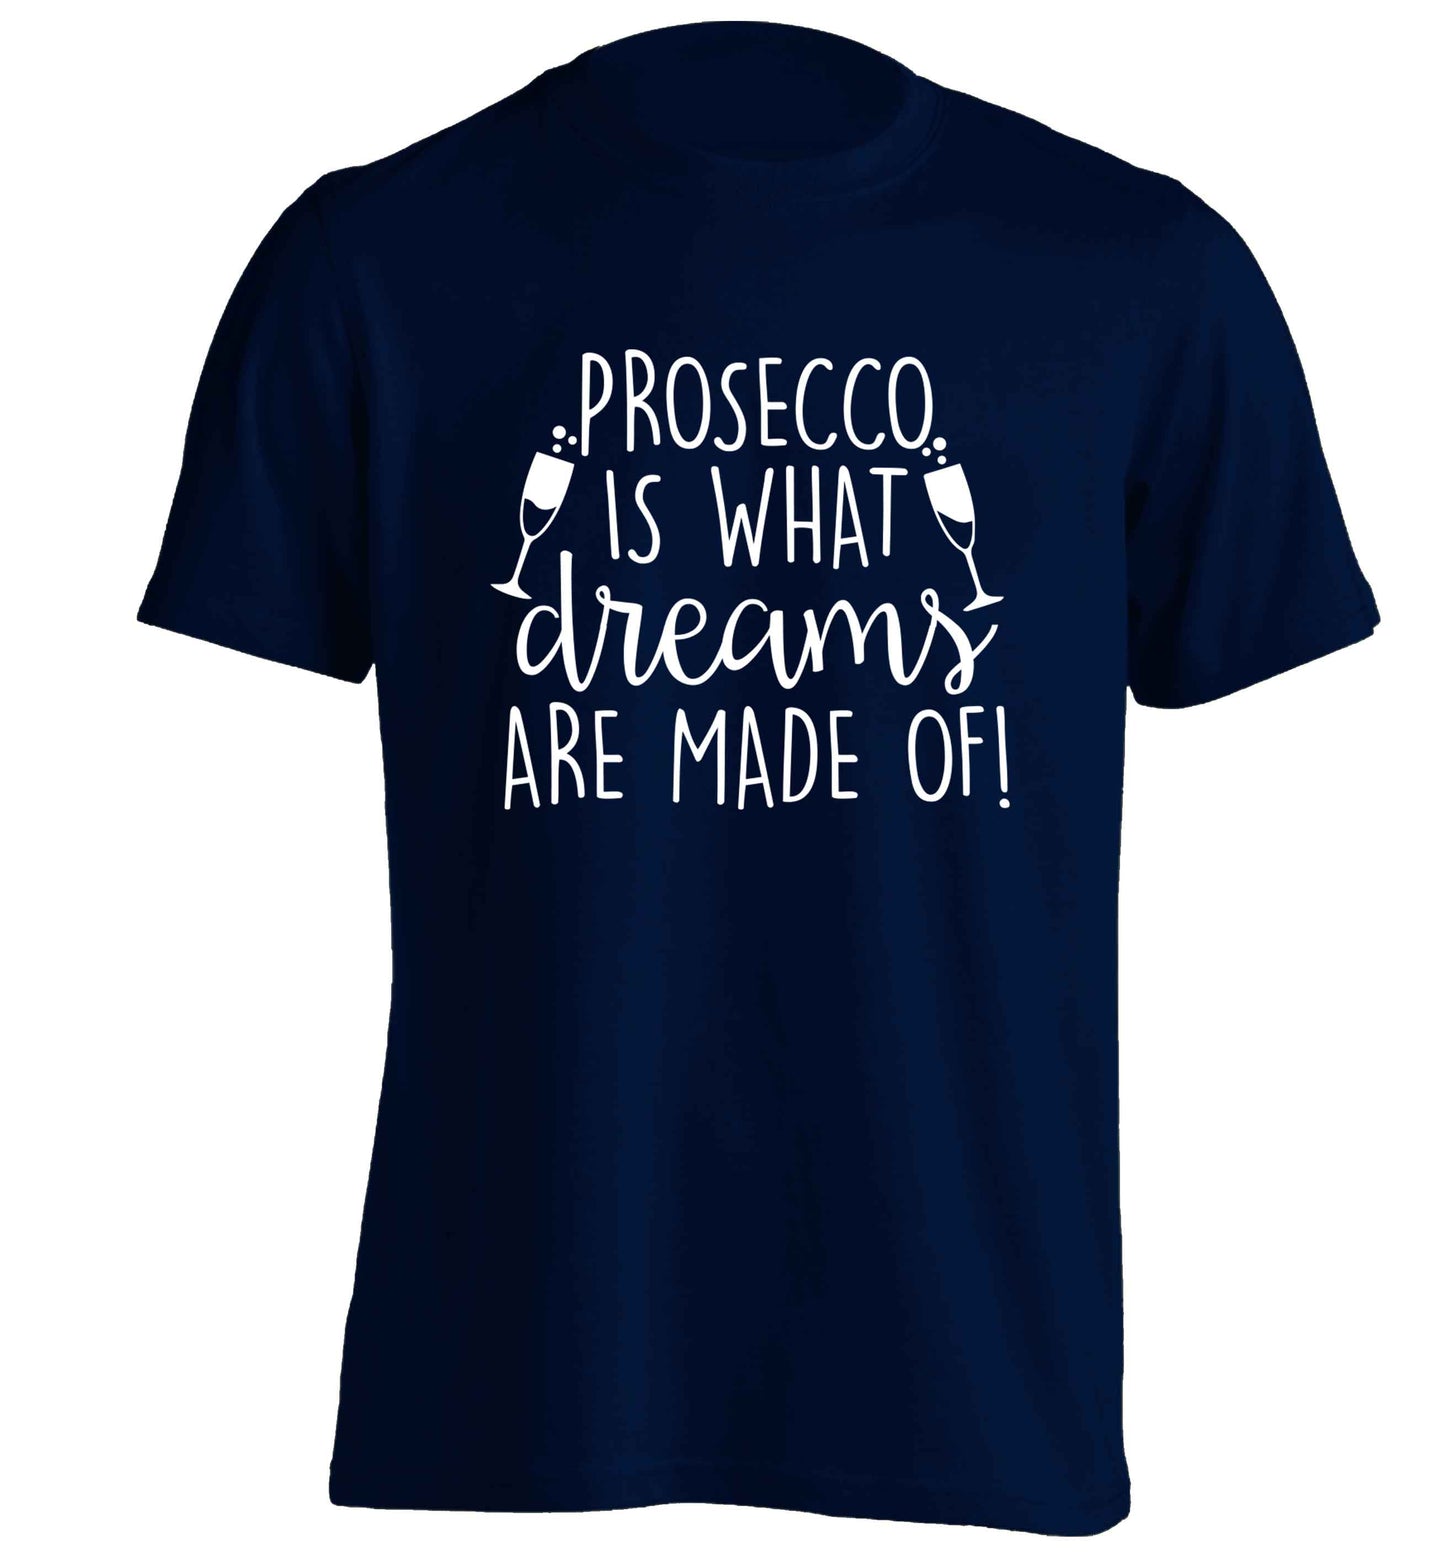 Prosecco is what dreams are made of adults unisex navy Tshirt 2XL